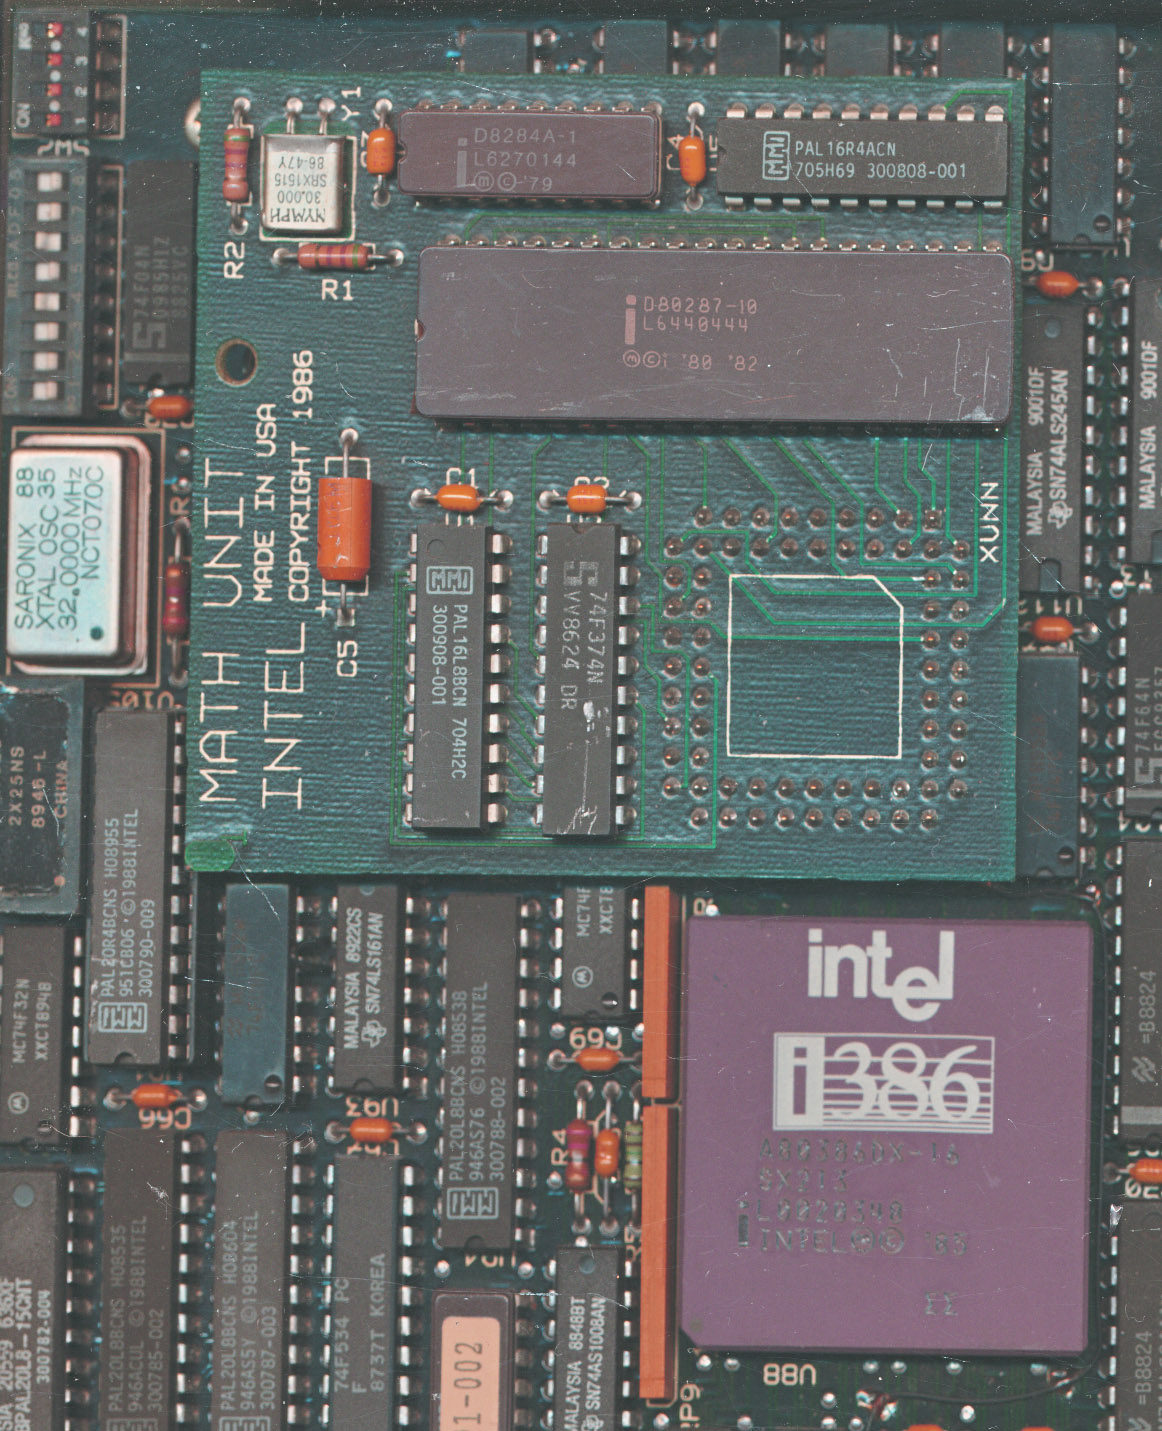 how-to-386-your-at-intel-inboard-386-at-the-cpu-shack-museum